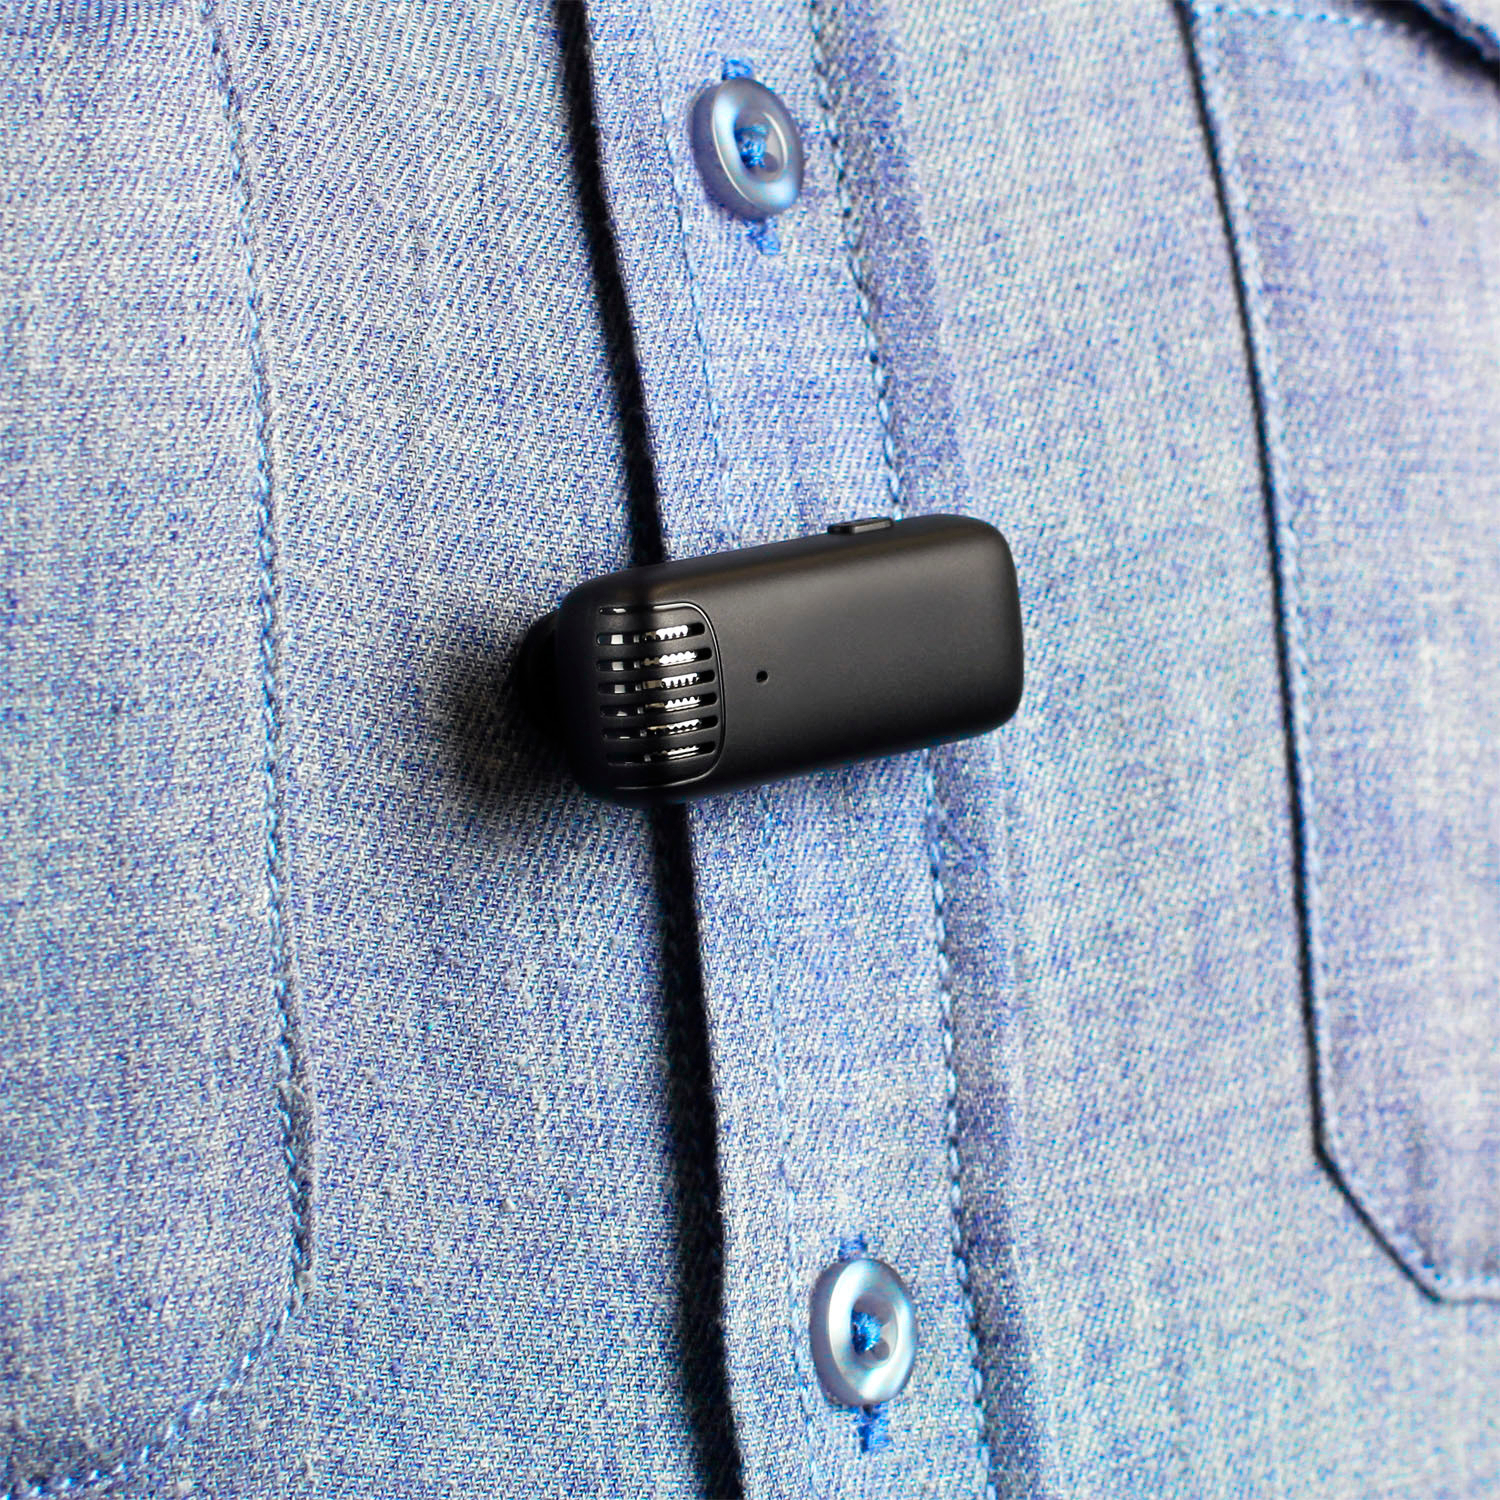 Angle View: Aluratek - Wireless Vlogging Lapel Microphone with Charging Case for USB-C Connector